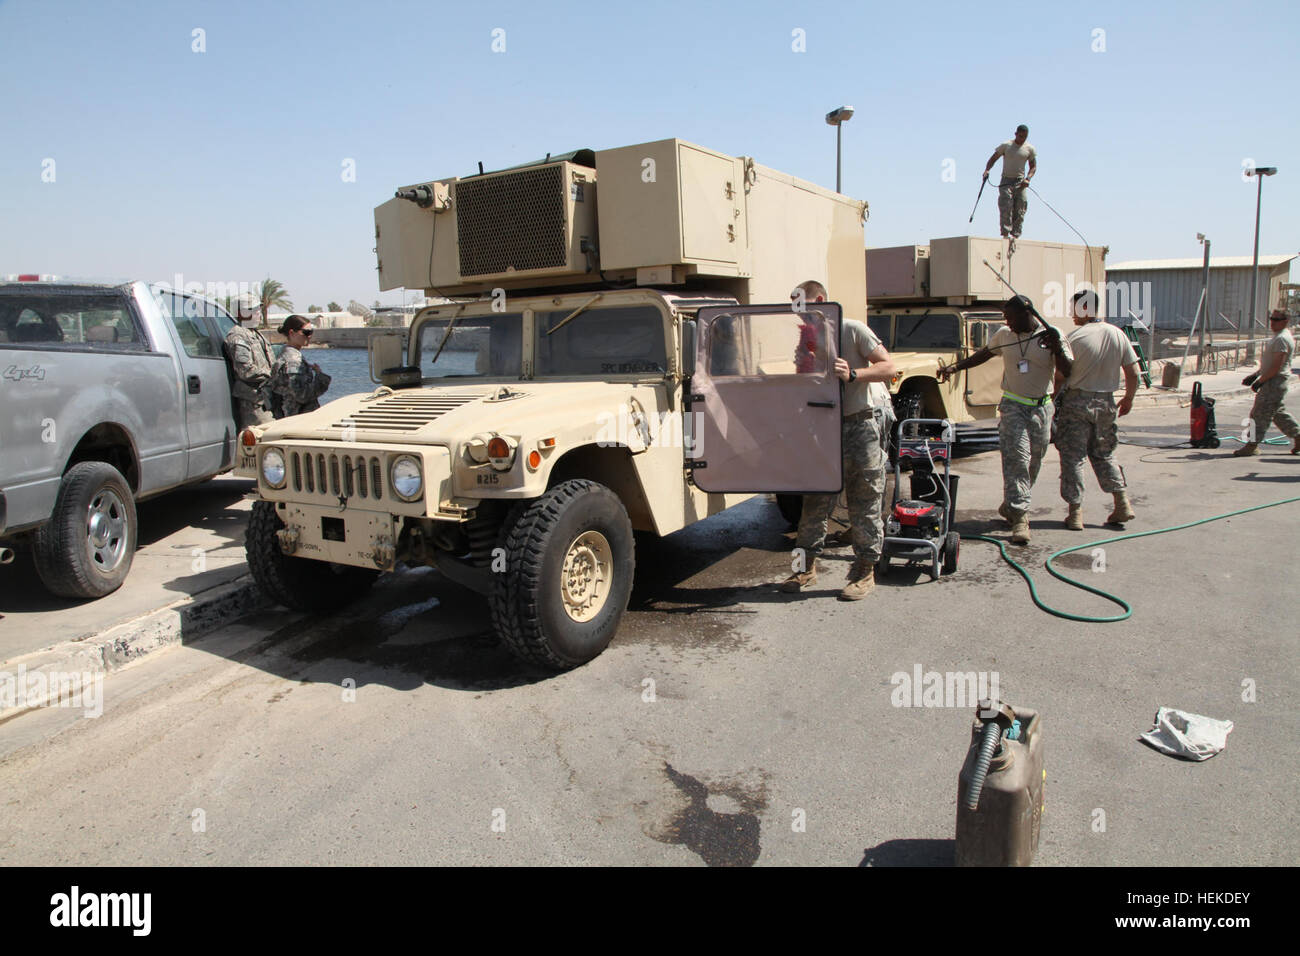 U.S. Army soldiers from the United States Forces - Iraq J2 shop clean their vehicles and equipment at Al-Faw Palace on victory Base Complex in Baghdad, Iraq, Sept. 11, 2011. The soldiers are preparing this equipment for its return to the United States as part of the draw down in support of Operation New Dawn. (U.S. Army photo by Sgt Matthew Friberg/Released) Troops clean vehicles on Victory Base Complex 110911-A-JL274-011 Stock Photo